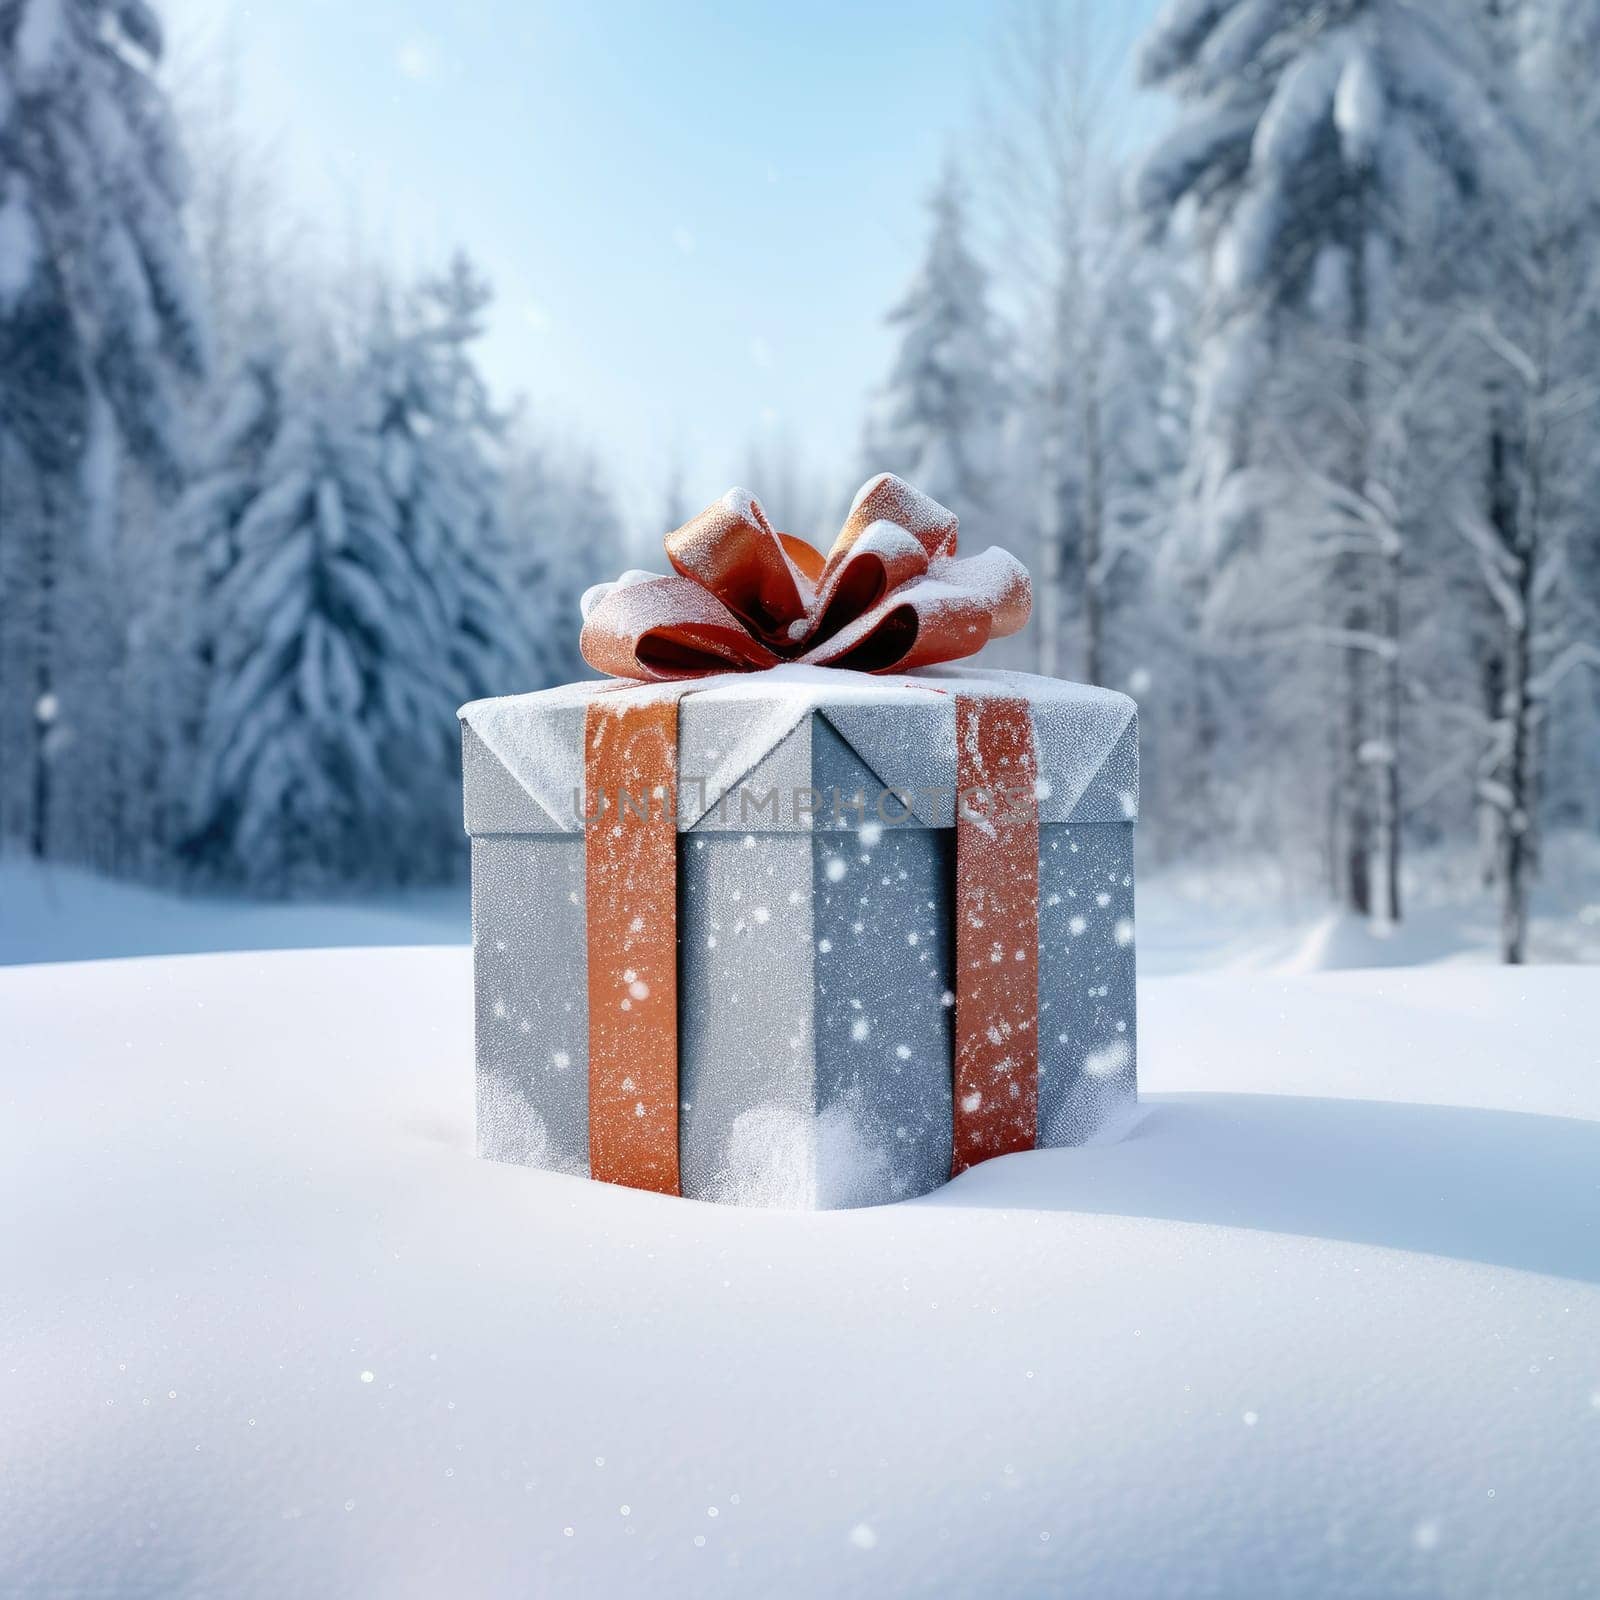 A large gift box lies in the snow, a perfect template for Christmas sales by andreyz